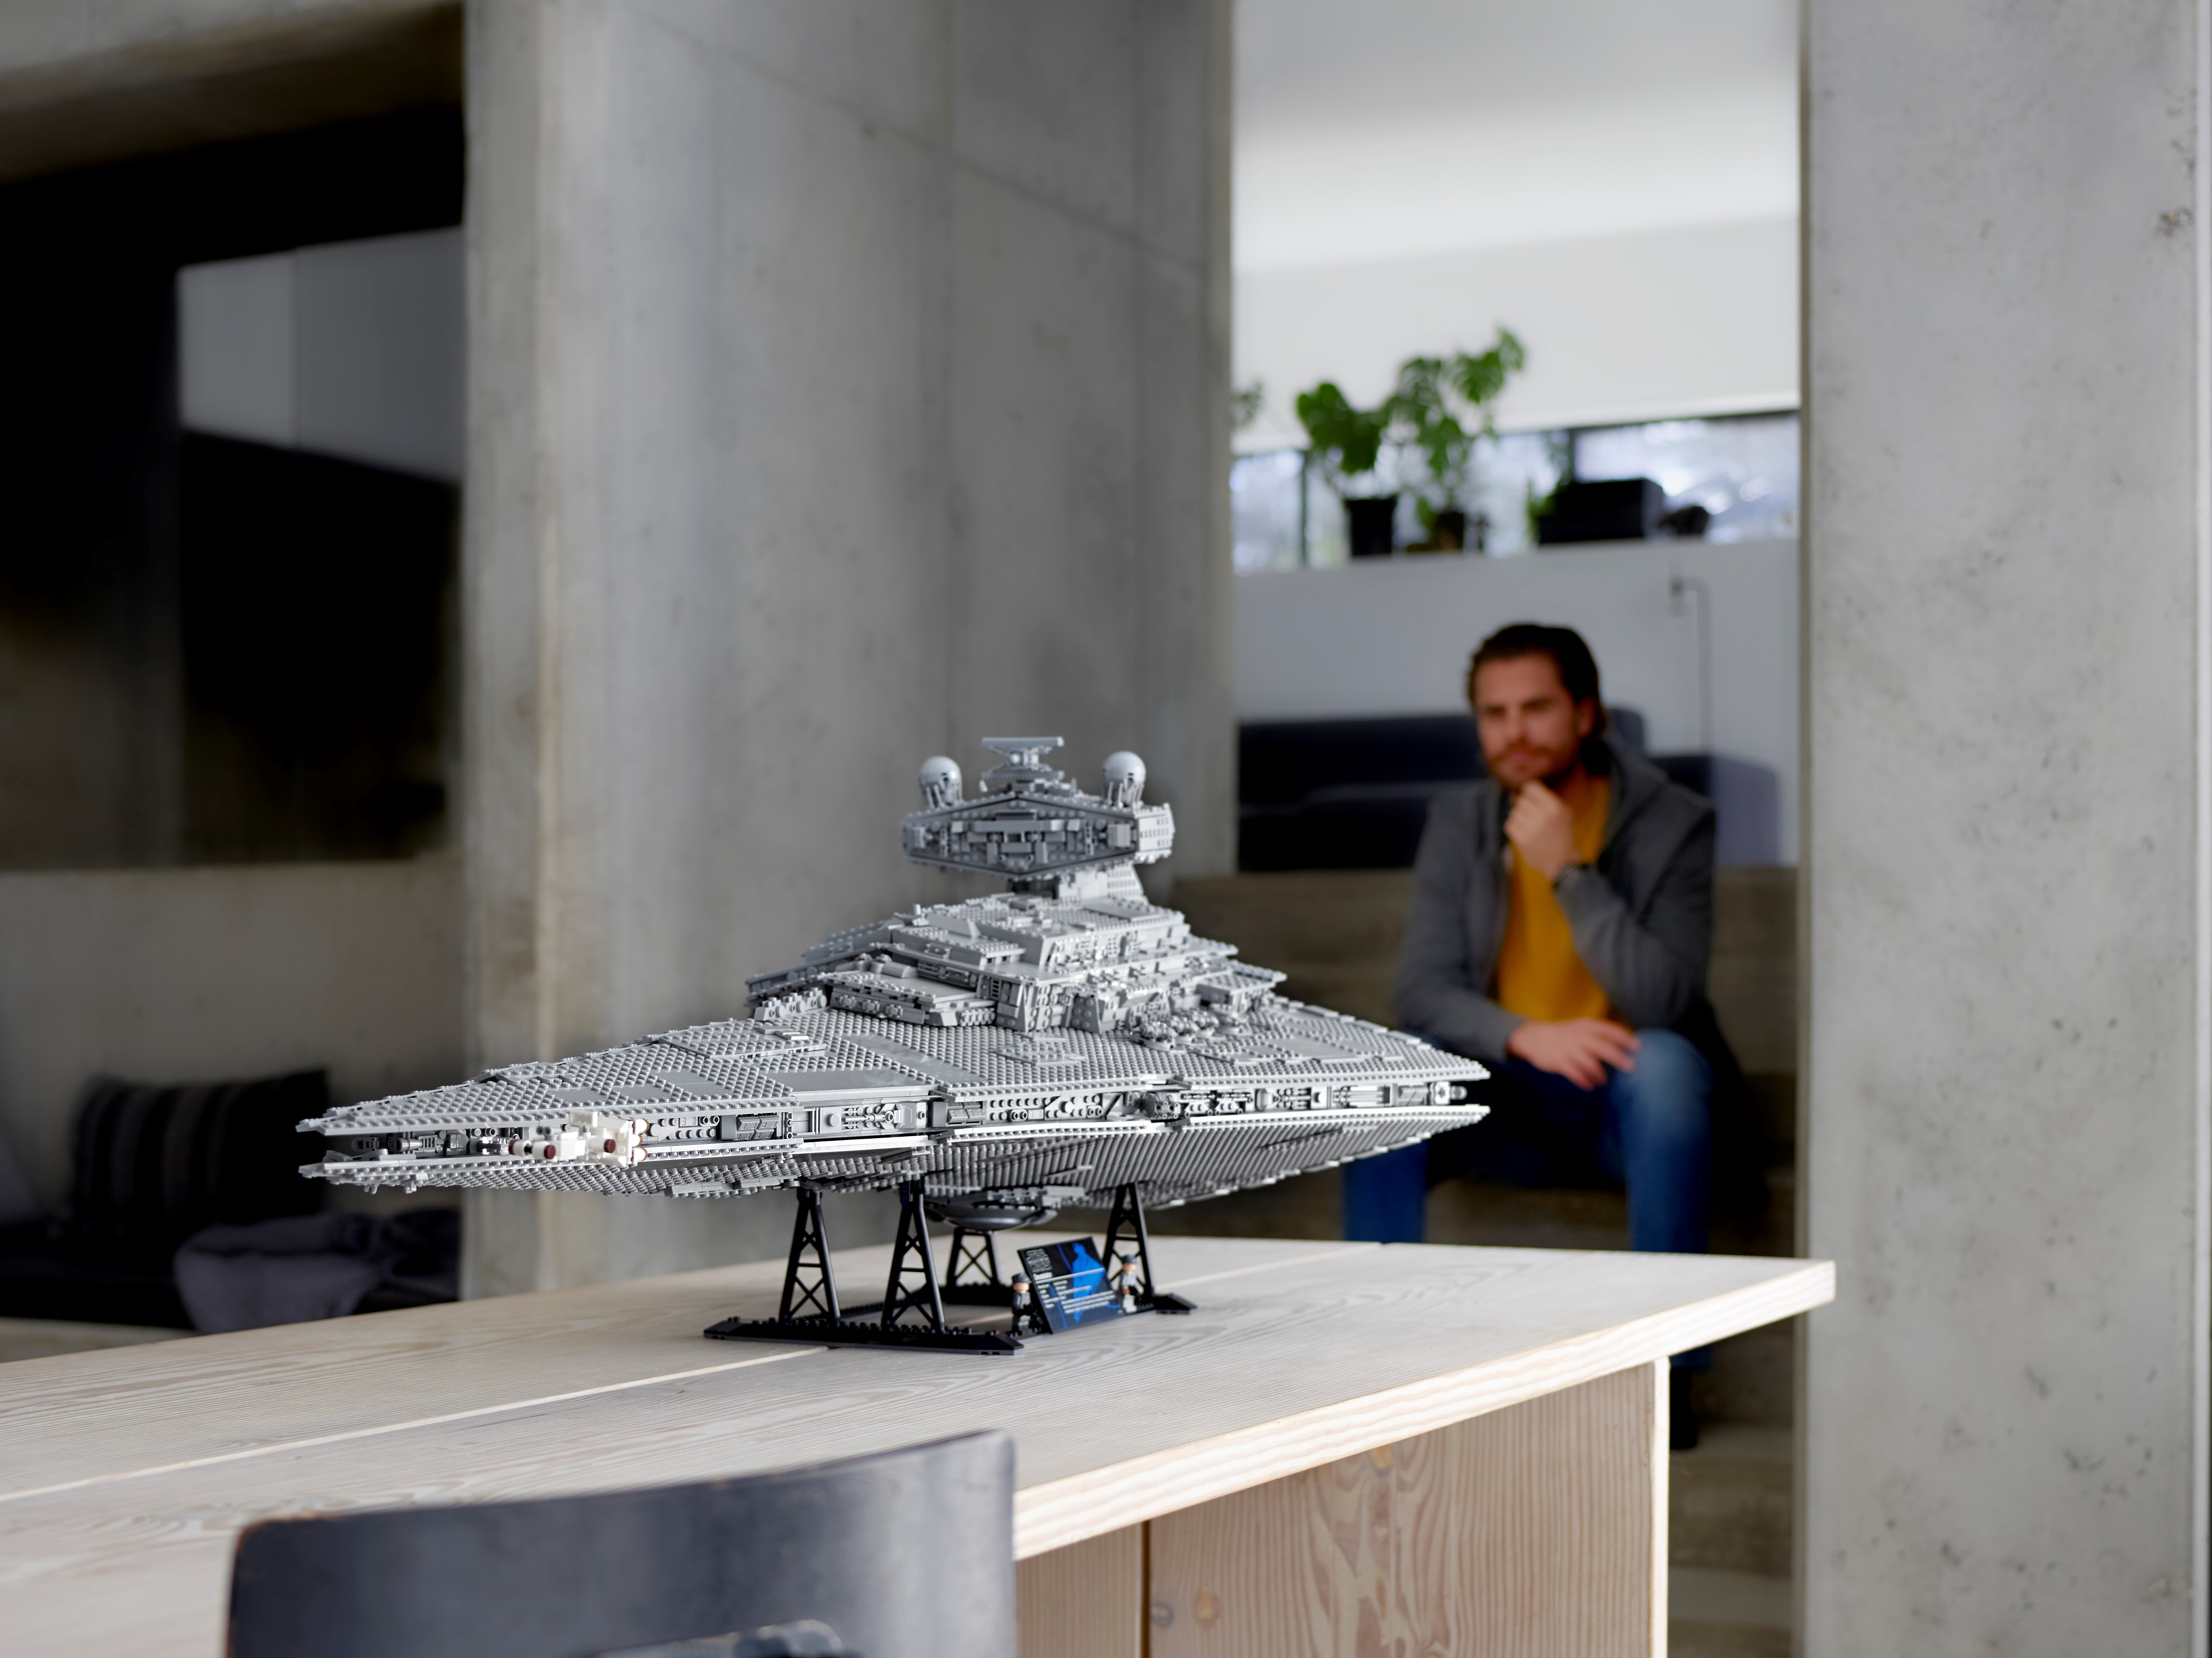 Imperial Star Destroyer™ 75252 | Star Wars™ | Buy online at the LEGO® US